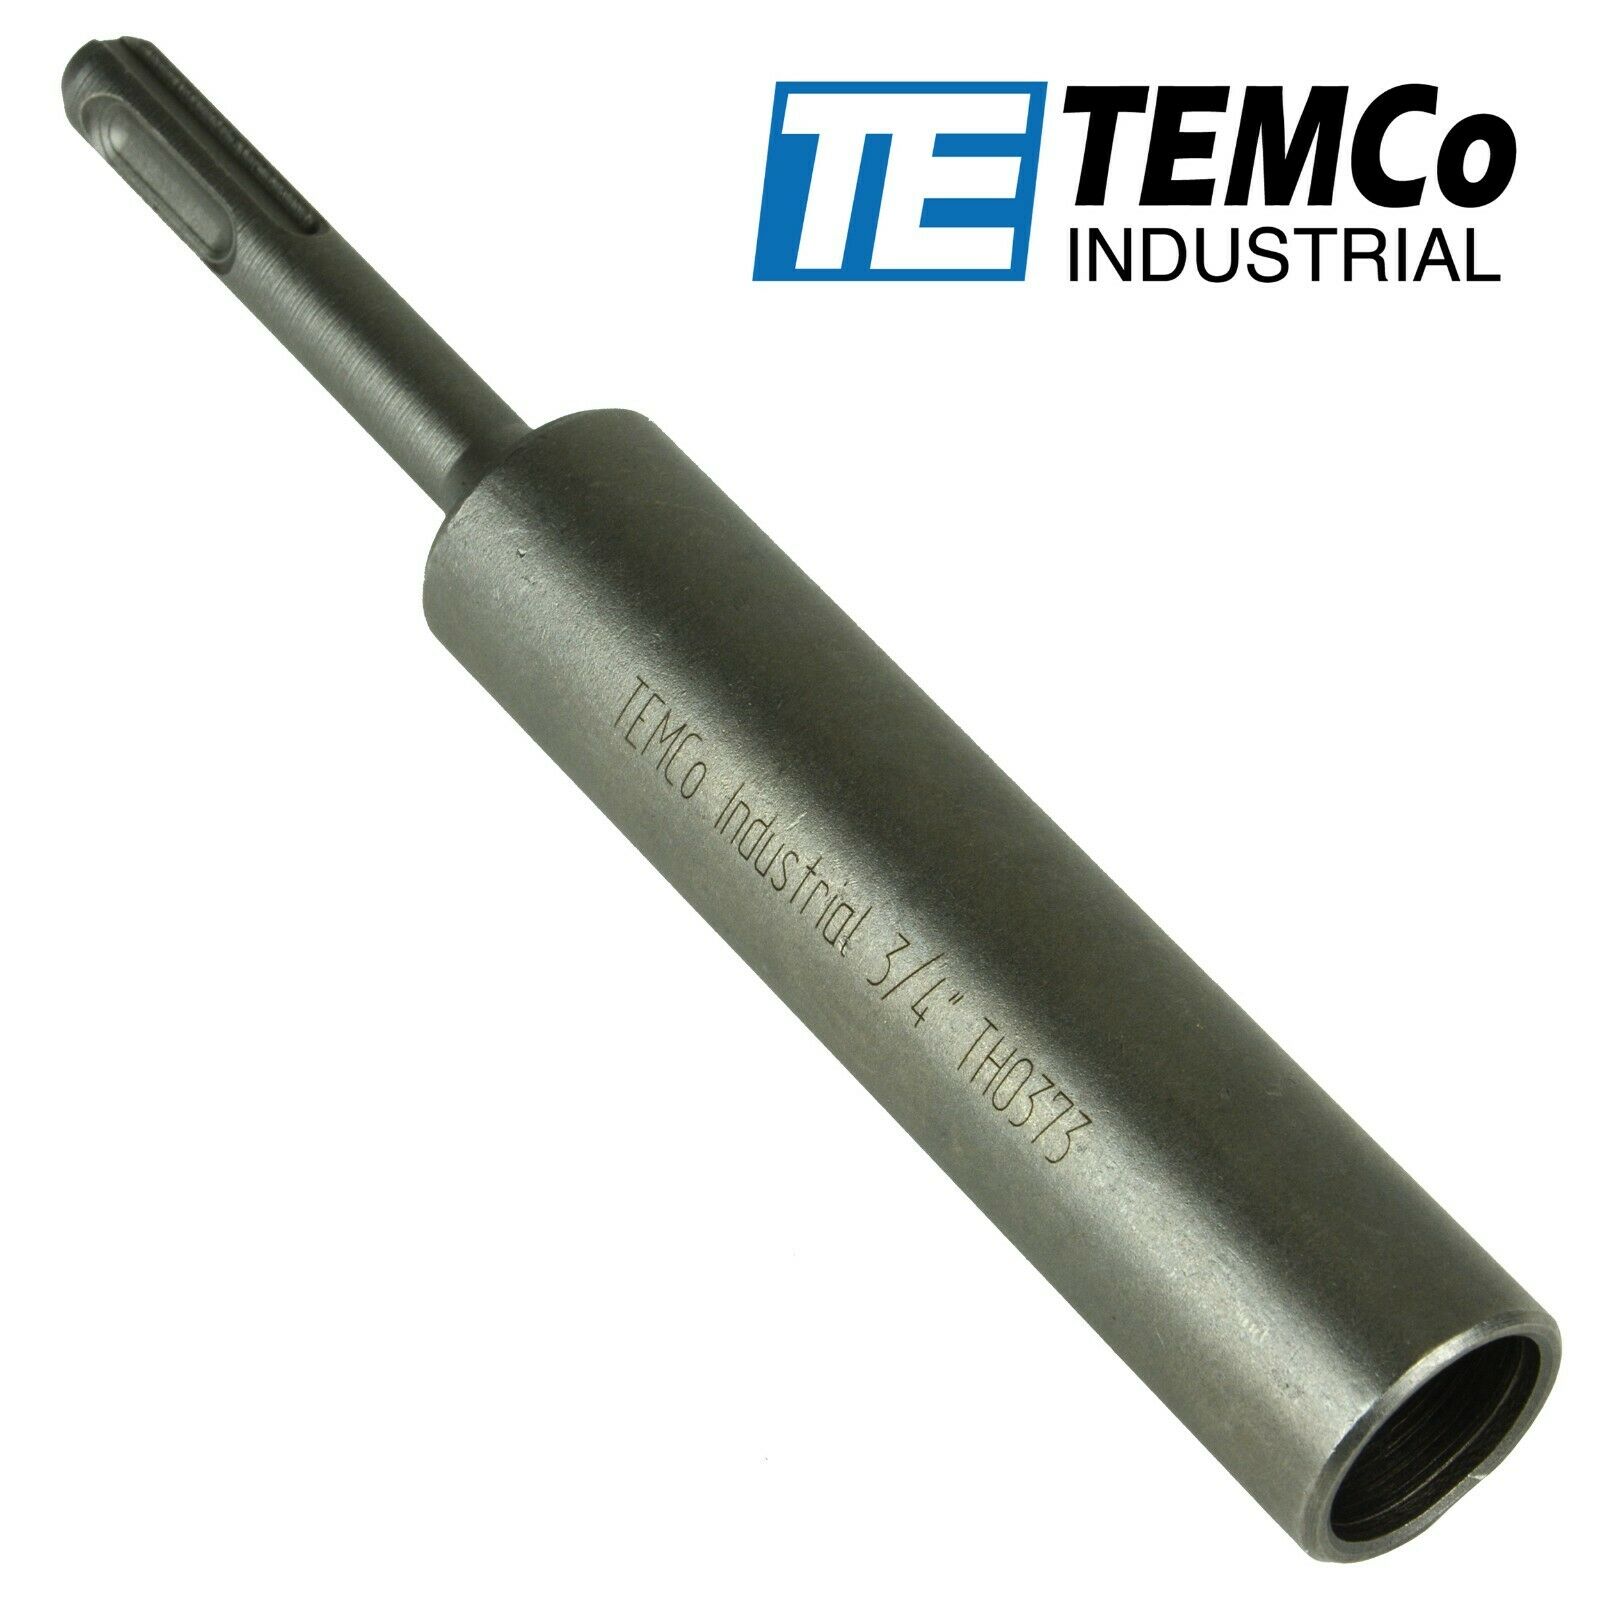 Temco Industrial - 3/4" Bore Sds Plus Ground Rod Driver